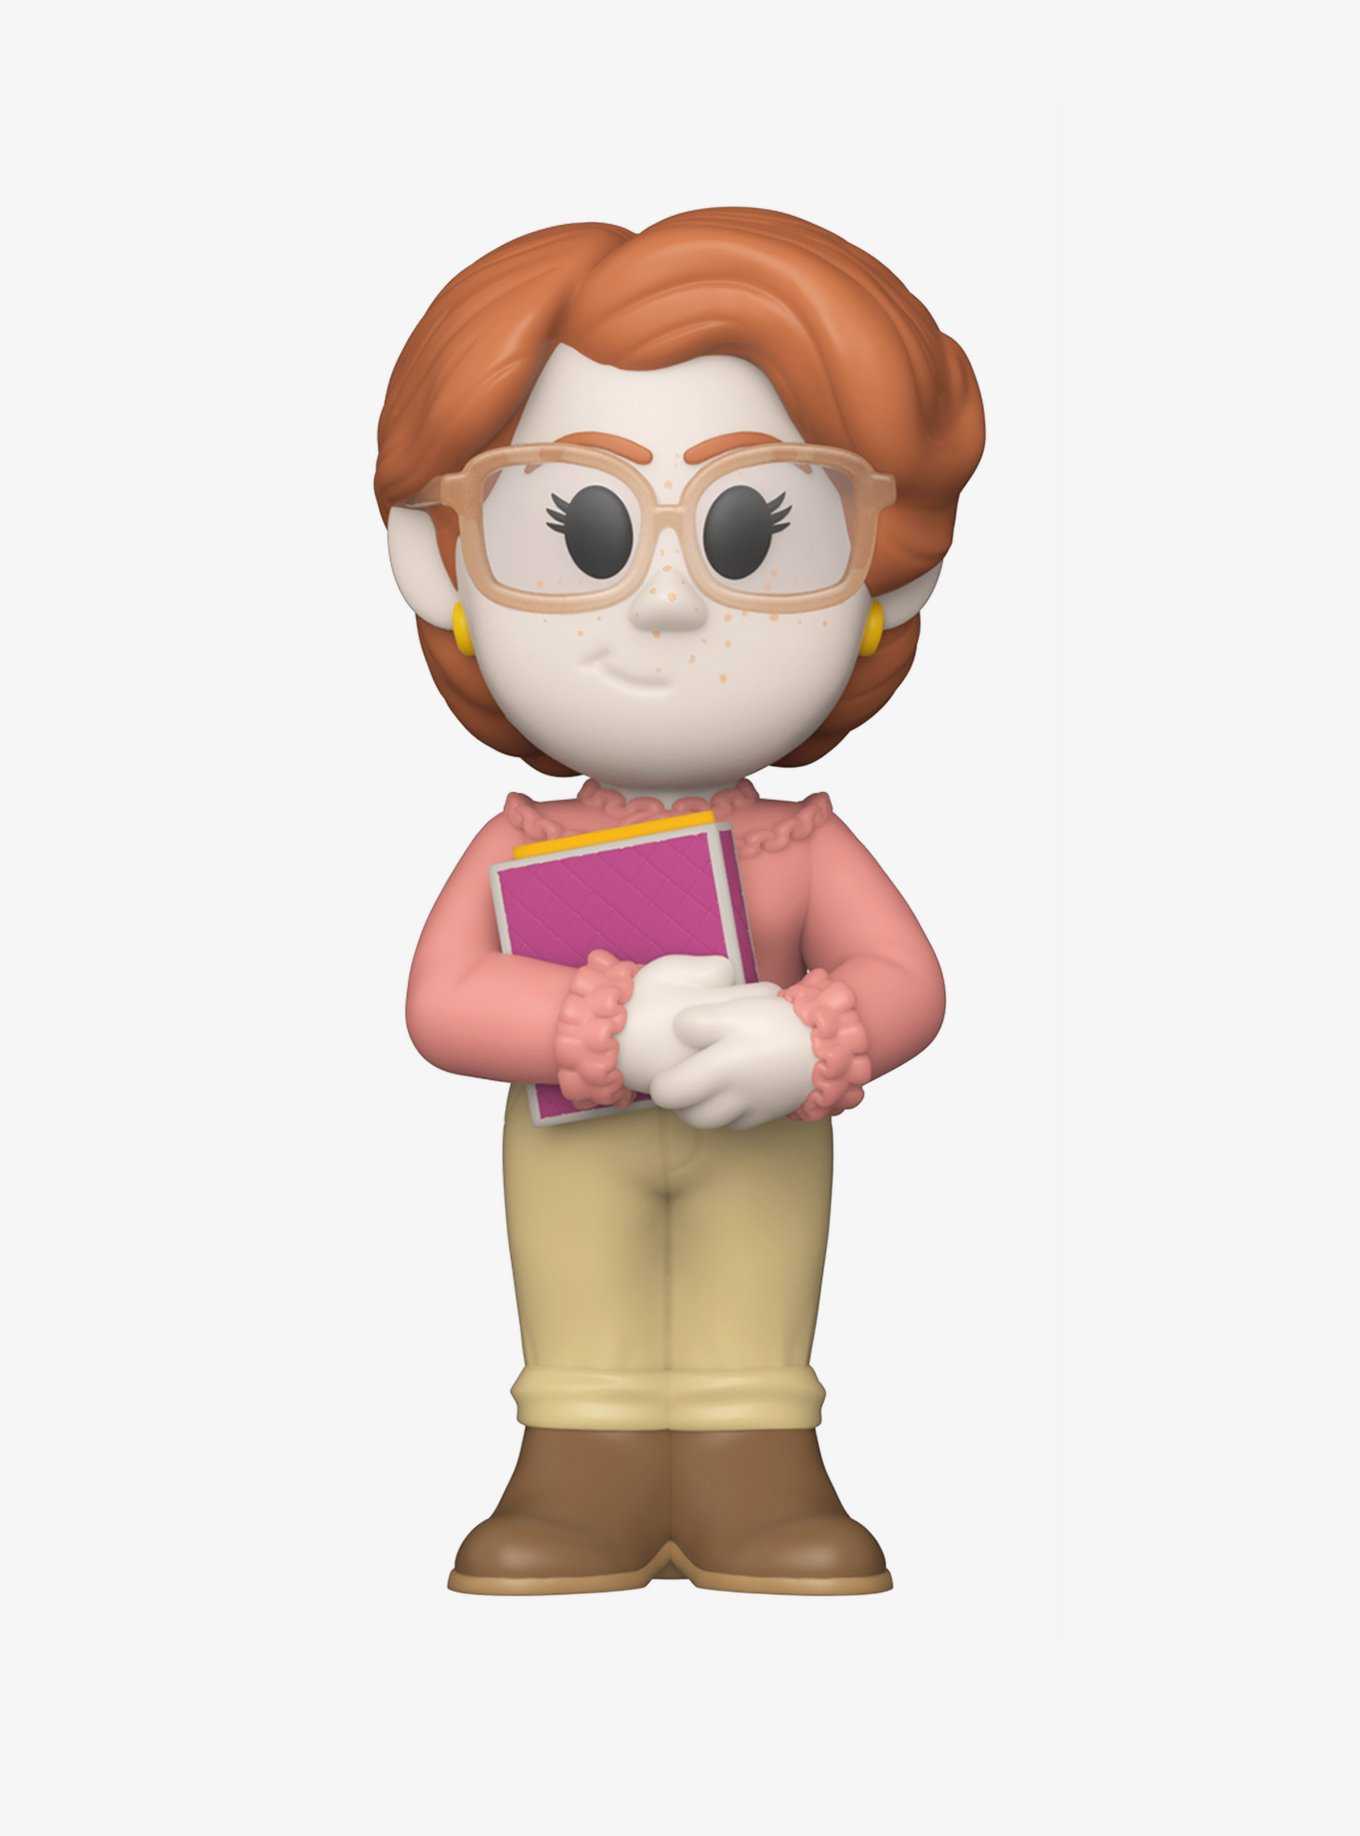 JUSTICE FOR BARB - Stranger Things - Pin